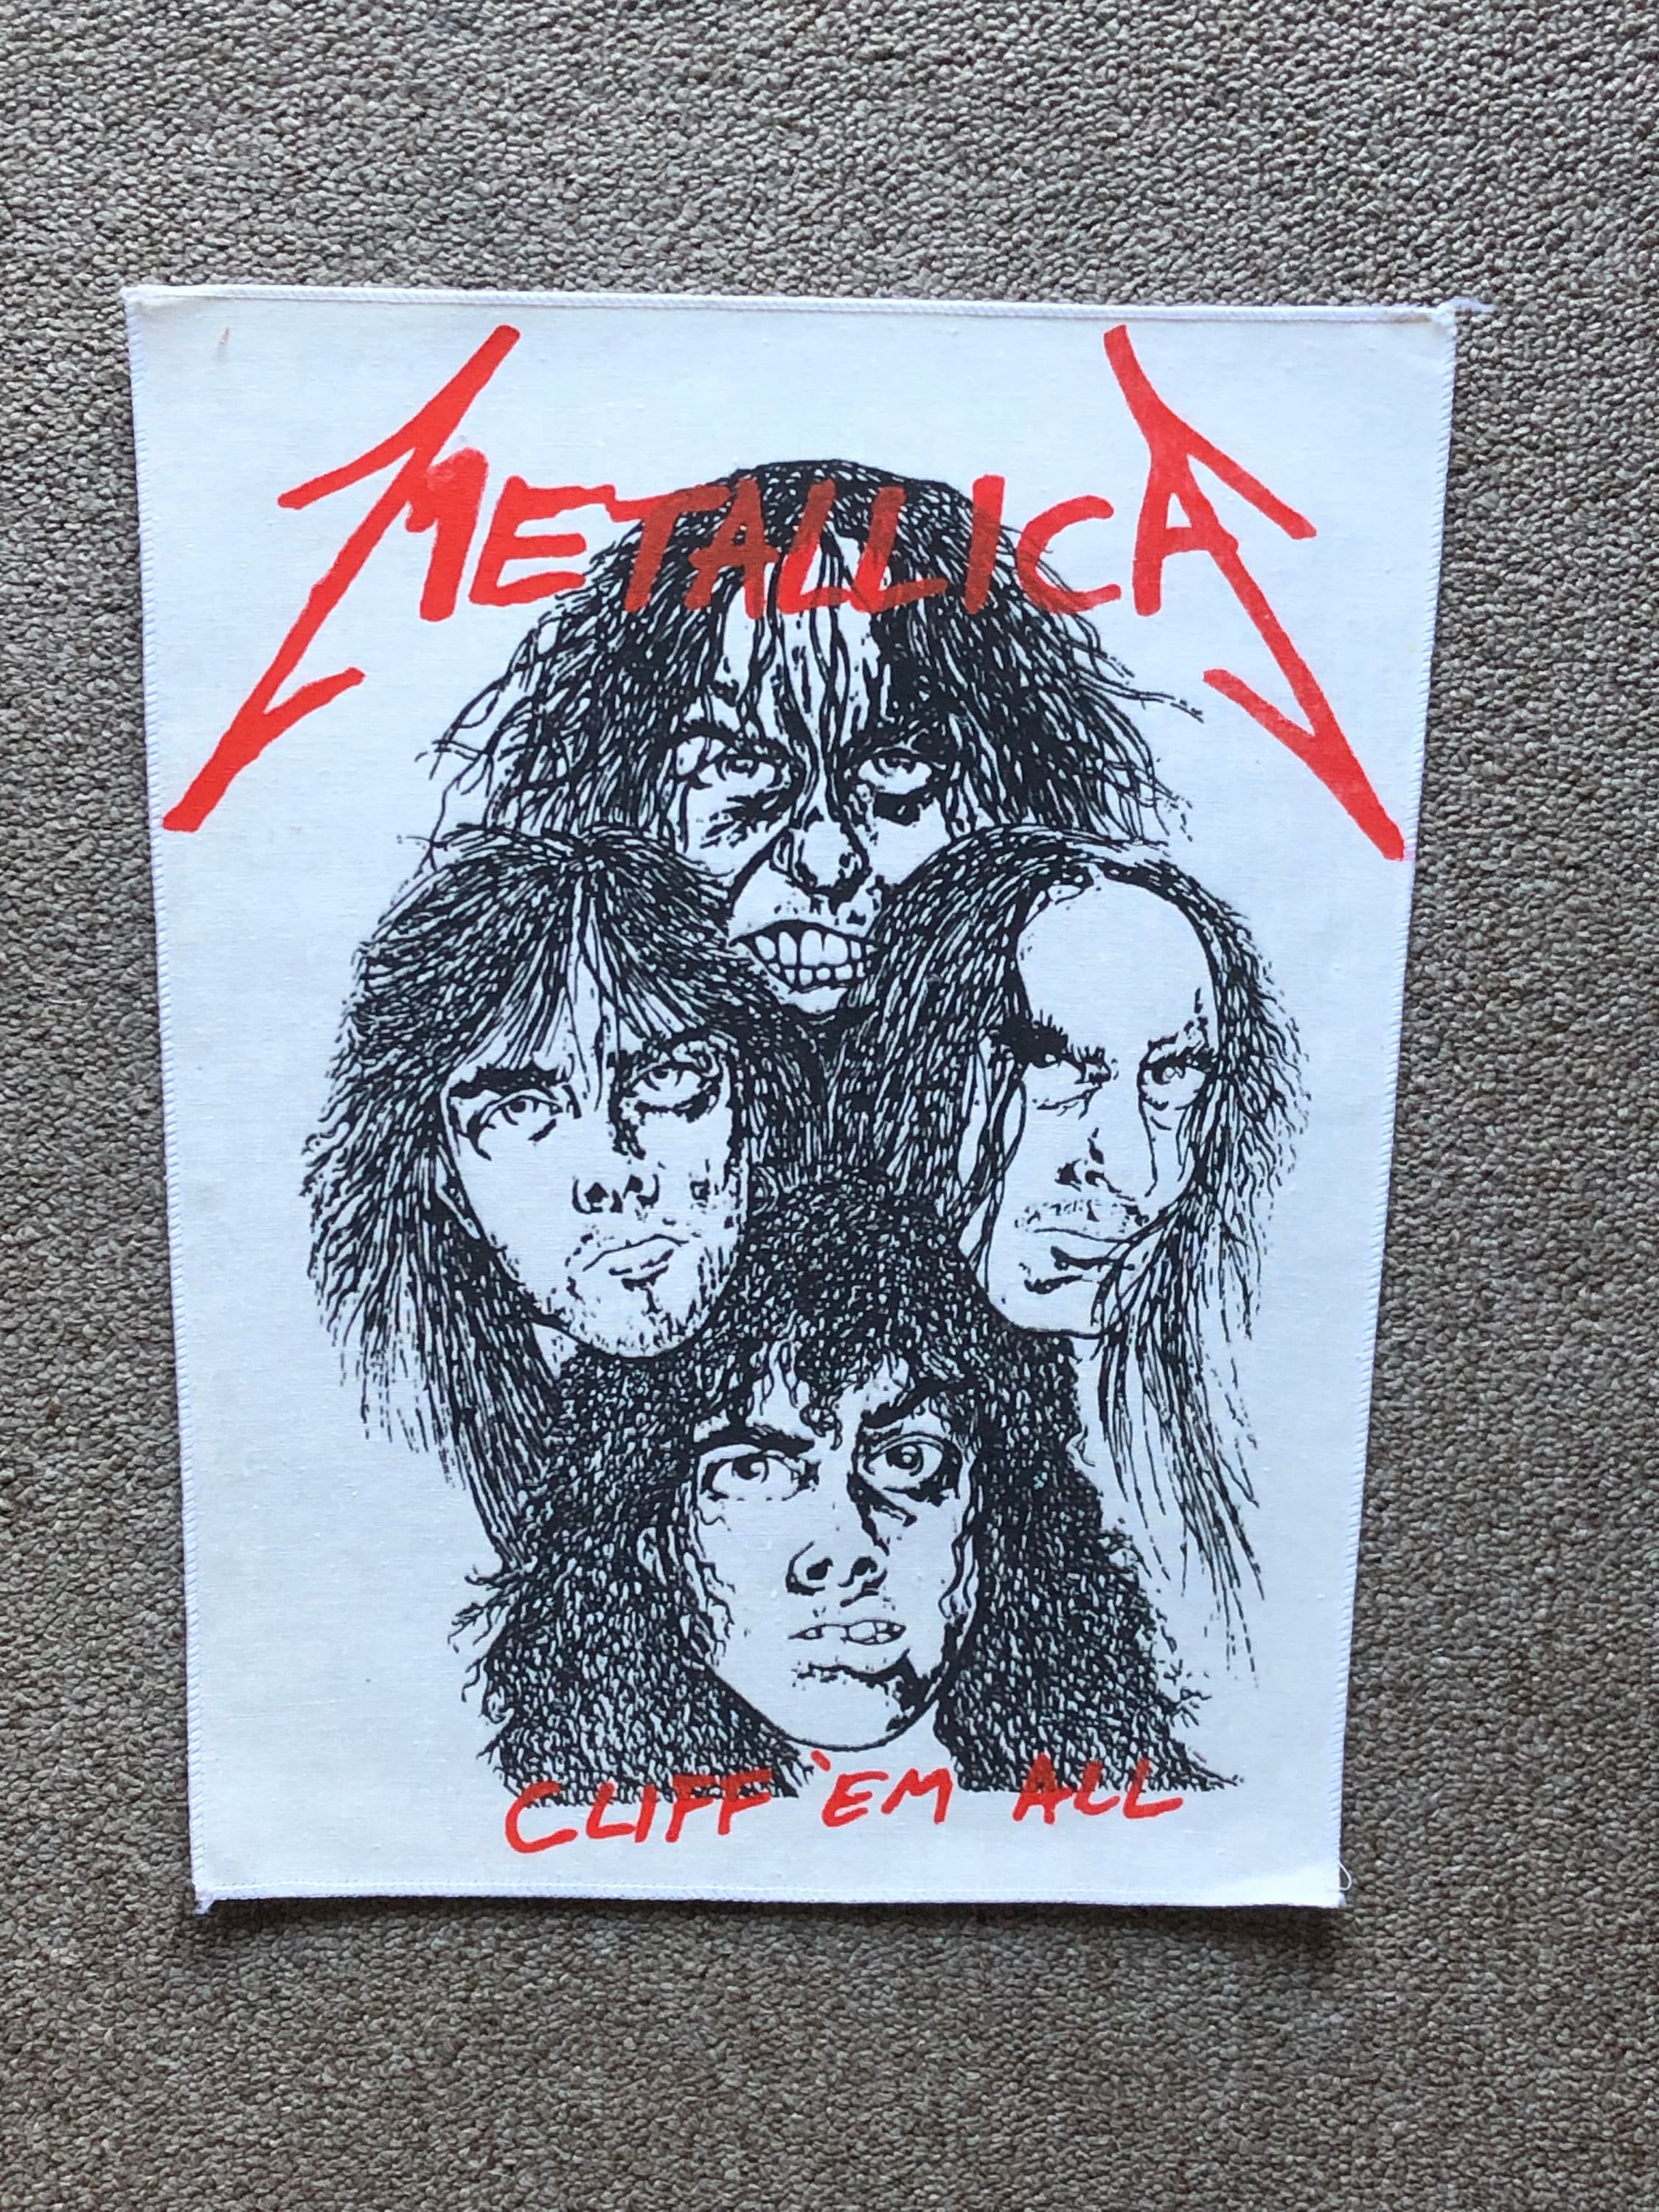 Metallica - Master of Puppets Band - 14 x 11 Printed Back Patch 